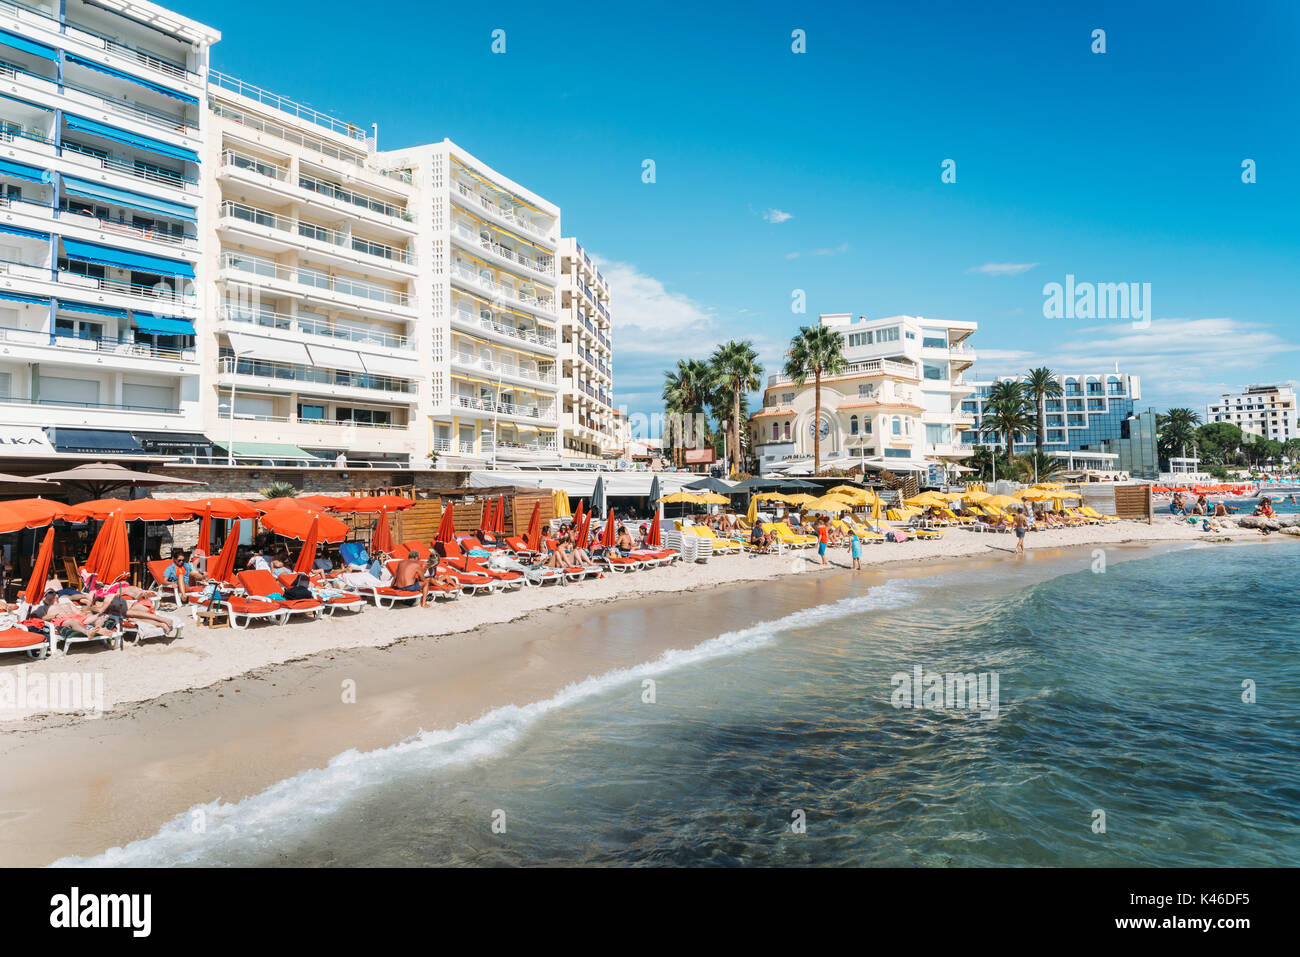 Juan les Pins, France - September 1st, 2017: Busy beach in Juan les Pins,  Cote d'Azur, France. The city is famous for its annal Jazz Festival Stock  Photo - Alamy